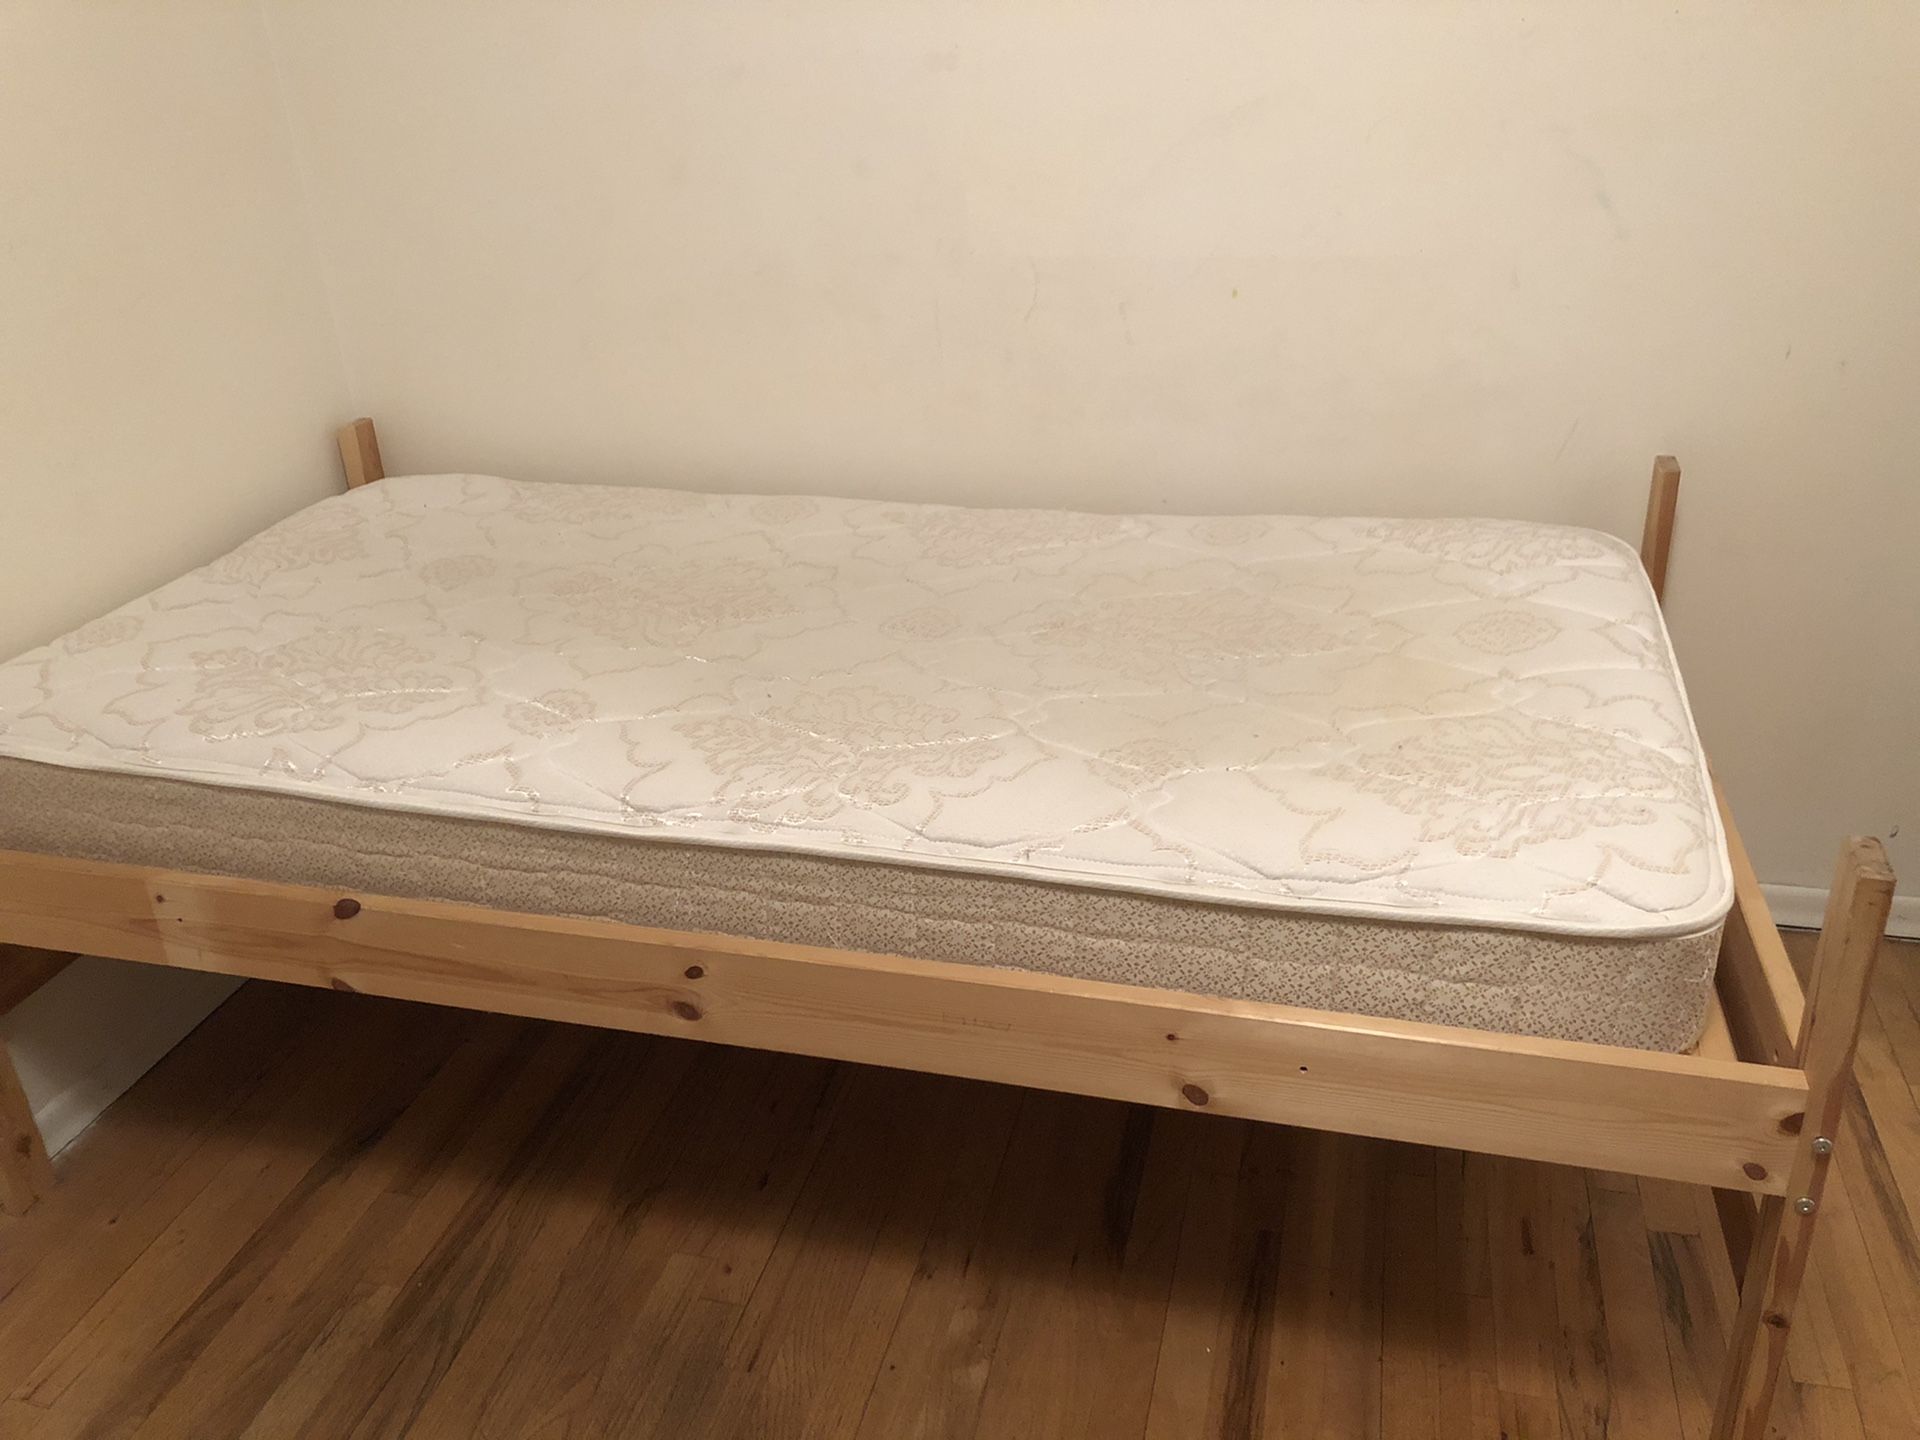 IKEA wood twin beds (was a bunk bed at one time)